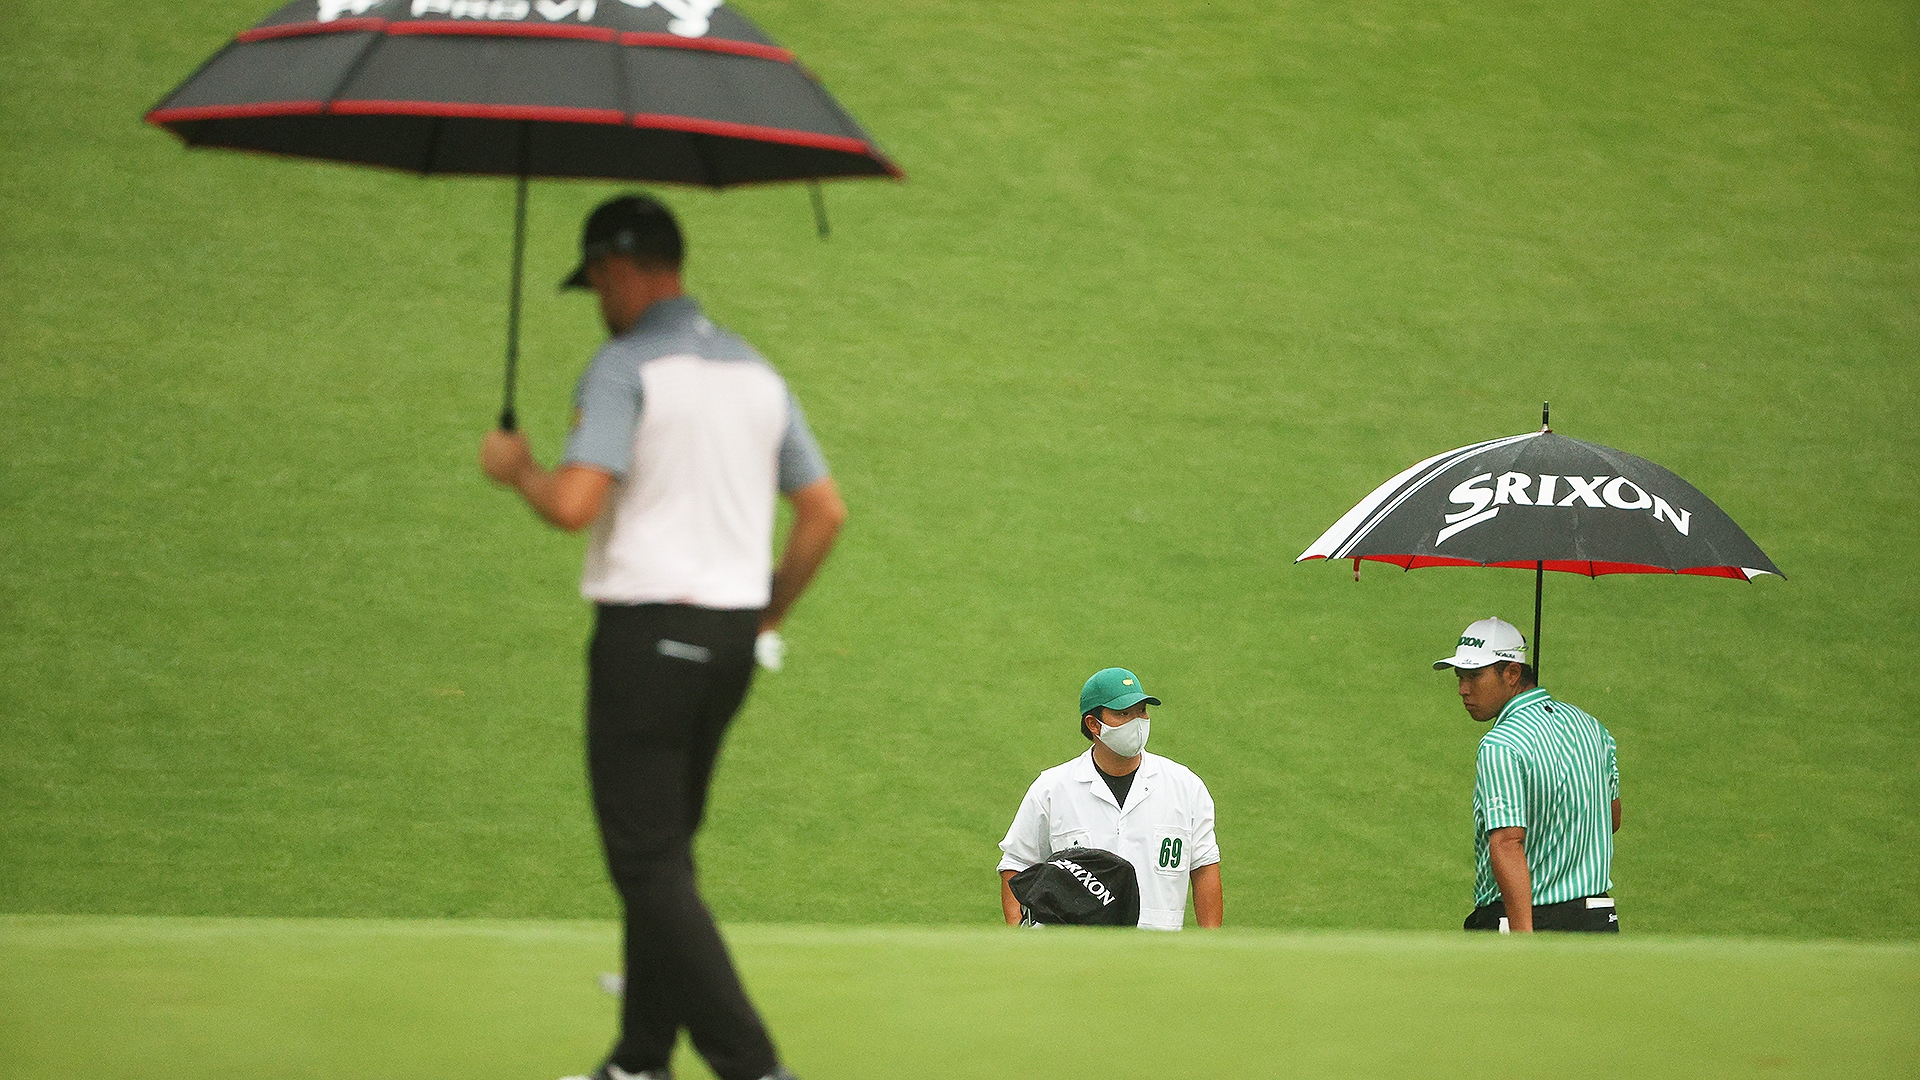 After just 25 minutes, first round of Masters suspended because of weather